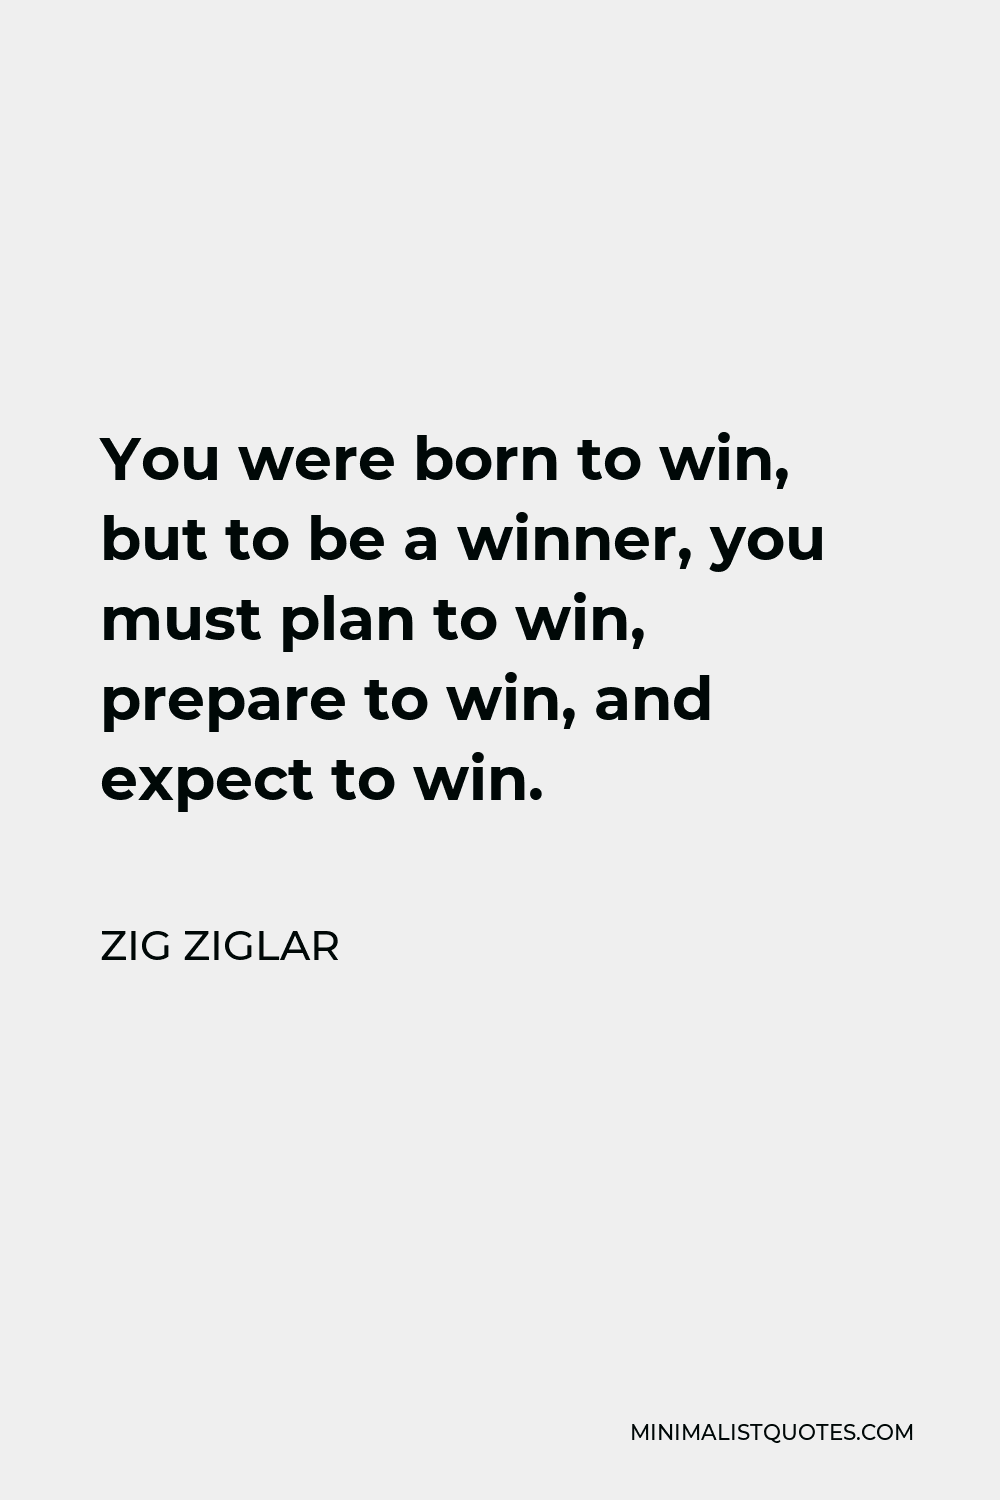 Zig Ziglar Quote - You were born to win, but to be a winner, you must plan to win, prepare to win, and expect to win.